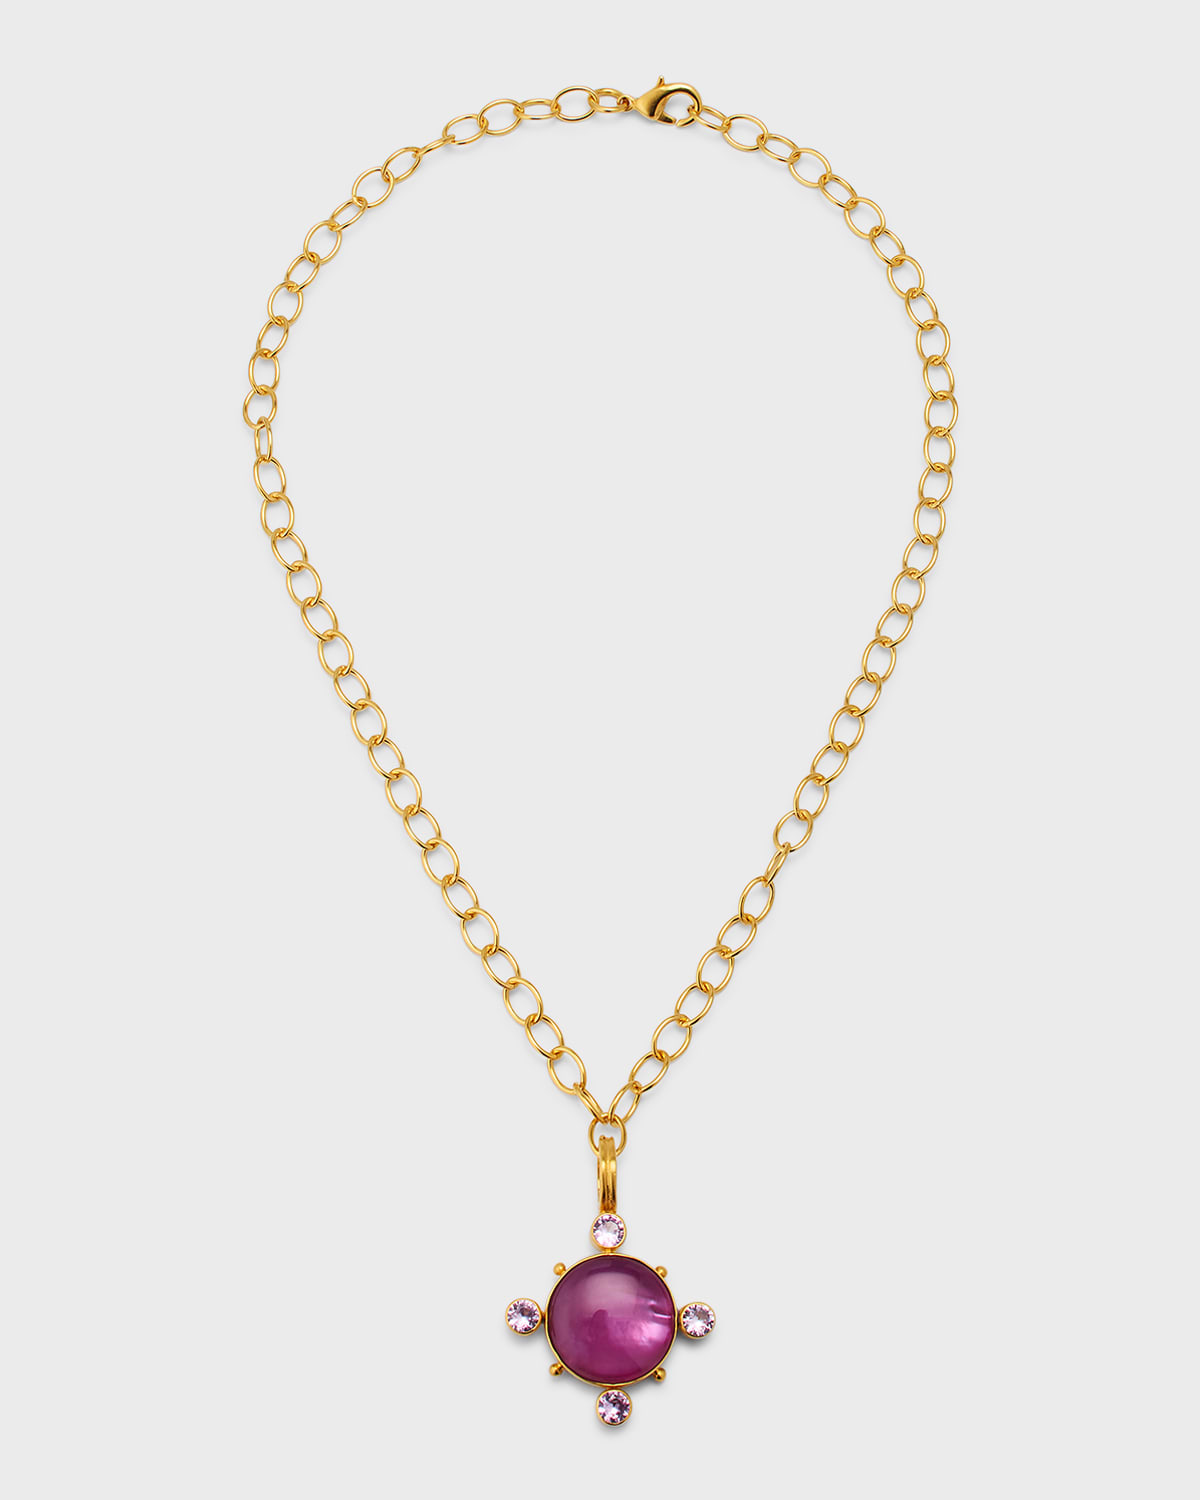 Dina Mackney Pink Doublet Necklace With Sapphire Accents In Gold